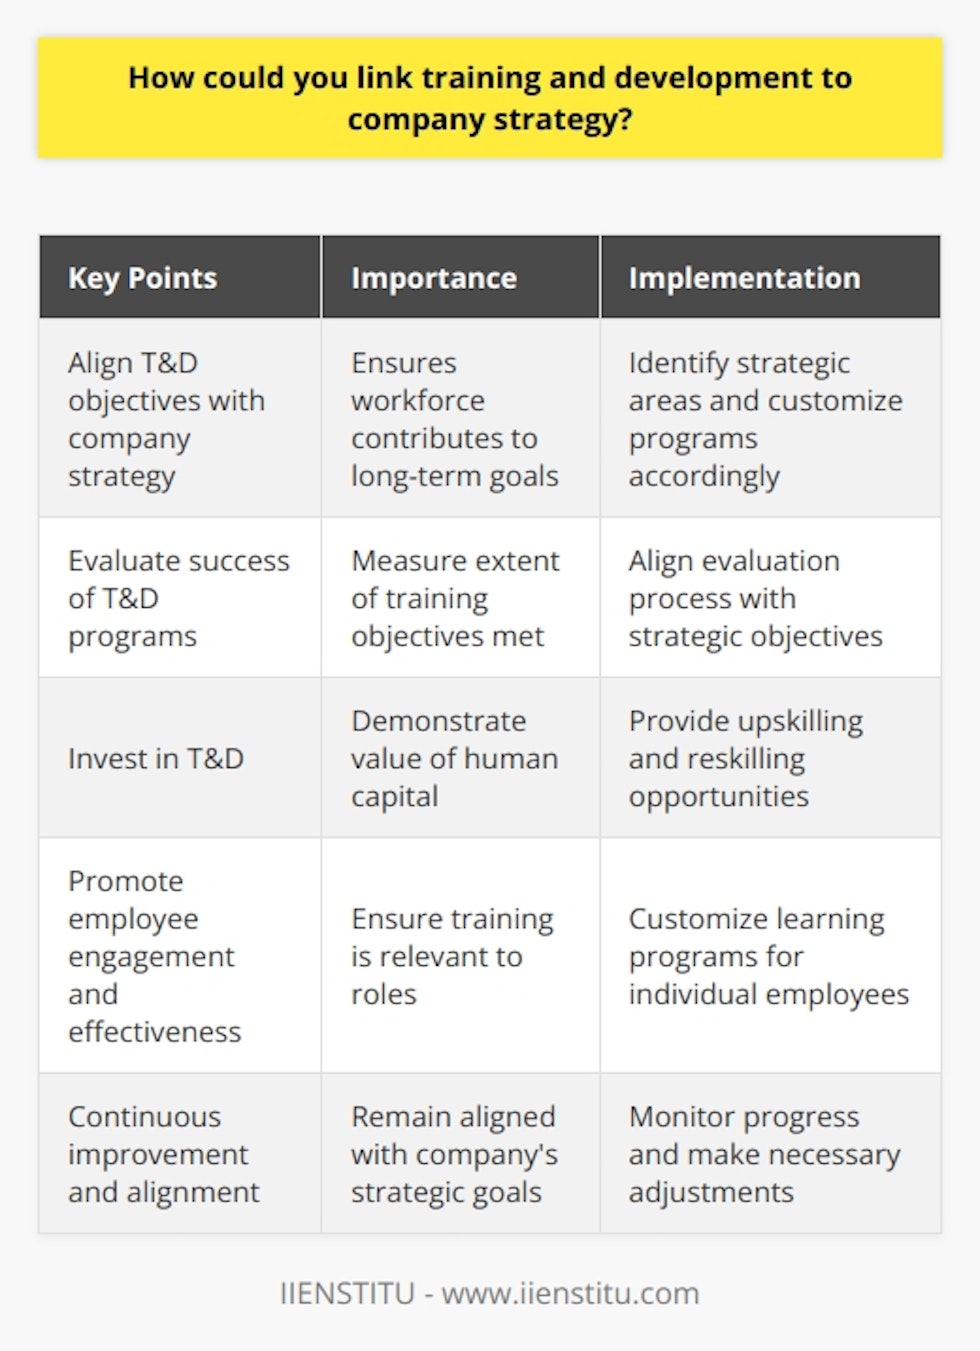 Linking training and development (T&D) to company strategy is essential for organizations to ensure that their workforce is equipped with the necessary skills and knowledge to contribute to the achievement of long-term strategic goals. By aligning T&D objectives with the overall goals of the company, organizations can enhance workforce competence and productivity, leading to organizational success.A crucial aspect of linking T&D to company strategy is aligning the objectives of T&D programs with the strategic focus areas of the organization. By identifying the key areas of the company strategy, T&D programs can directly target the vital skills required for organizational success. This customized approach ensures that employees receive training relevant to their roles, promoting higher engagement and effectiveness.To measure the success of T&D programs, organizations should have a robust evaluation system in place. This evaluation system should assess the extent to which training objectives have been met and how employees apply the acquired skills in their job functions. By closely aligning the evaluation process with strategic objectives, organizations can monitor progress and make necessary adjustments to their T&D initiatives. This feedback loop helps employees and the organization continuously improve and remain aligned with the company's strategic goals.Investing in T&D demonstrates the value that organizations place on their human capital. By providing opportunities for upskilling and reskilling, organizations can maintain a workforce that is prepared to adapt to technological advancements and shifts in customer demands. Recognizing the importance of human capital in achieving strategic success emphasizes the need for continuous investment in employee development.In summary, linking T&D to company strategy involves aligning objectives with organizational goals, customizing learning programs, measuring success through robust evaluations, and valuing human capital. By implementing a well-structured and strategically aligned T&D program, organizations can boost their competitive advantage by fostering employee development that aligns with the company's strategic objectives.